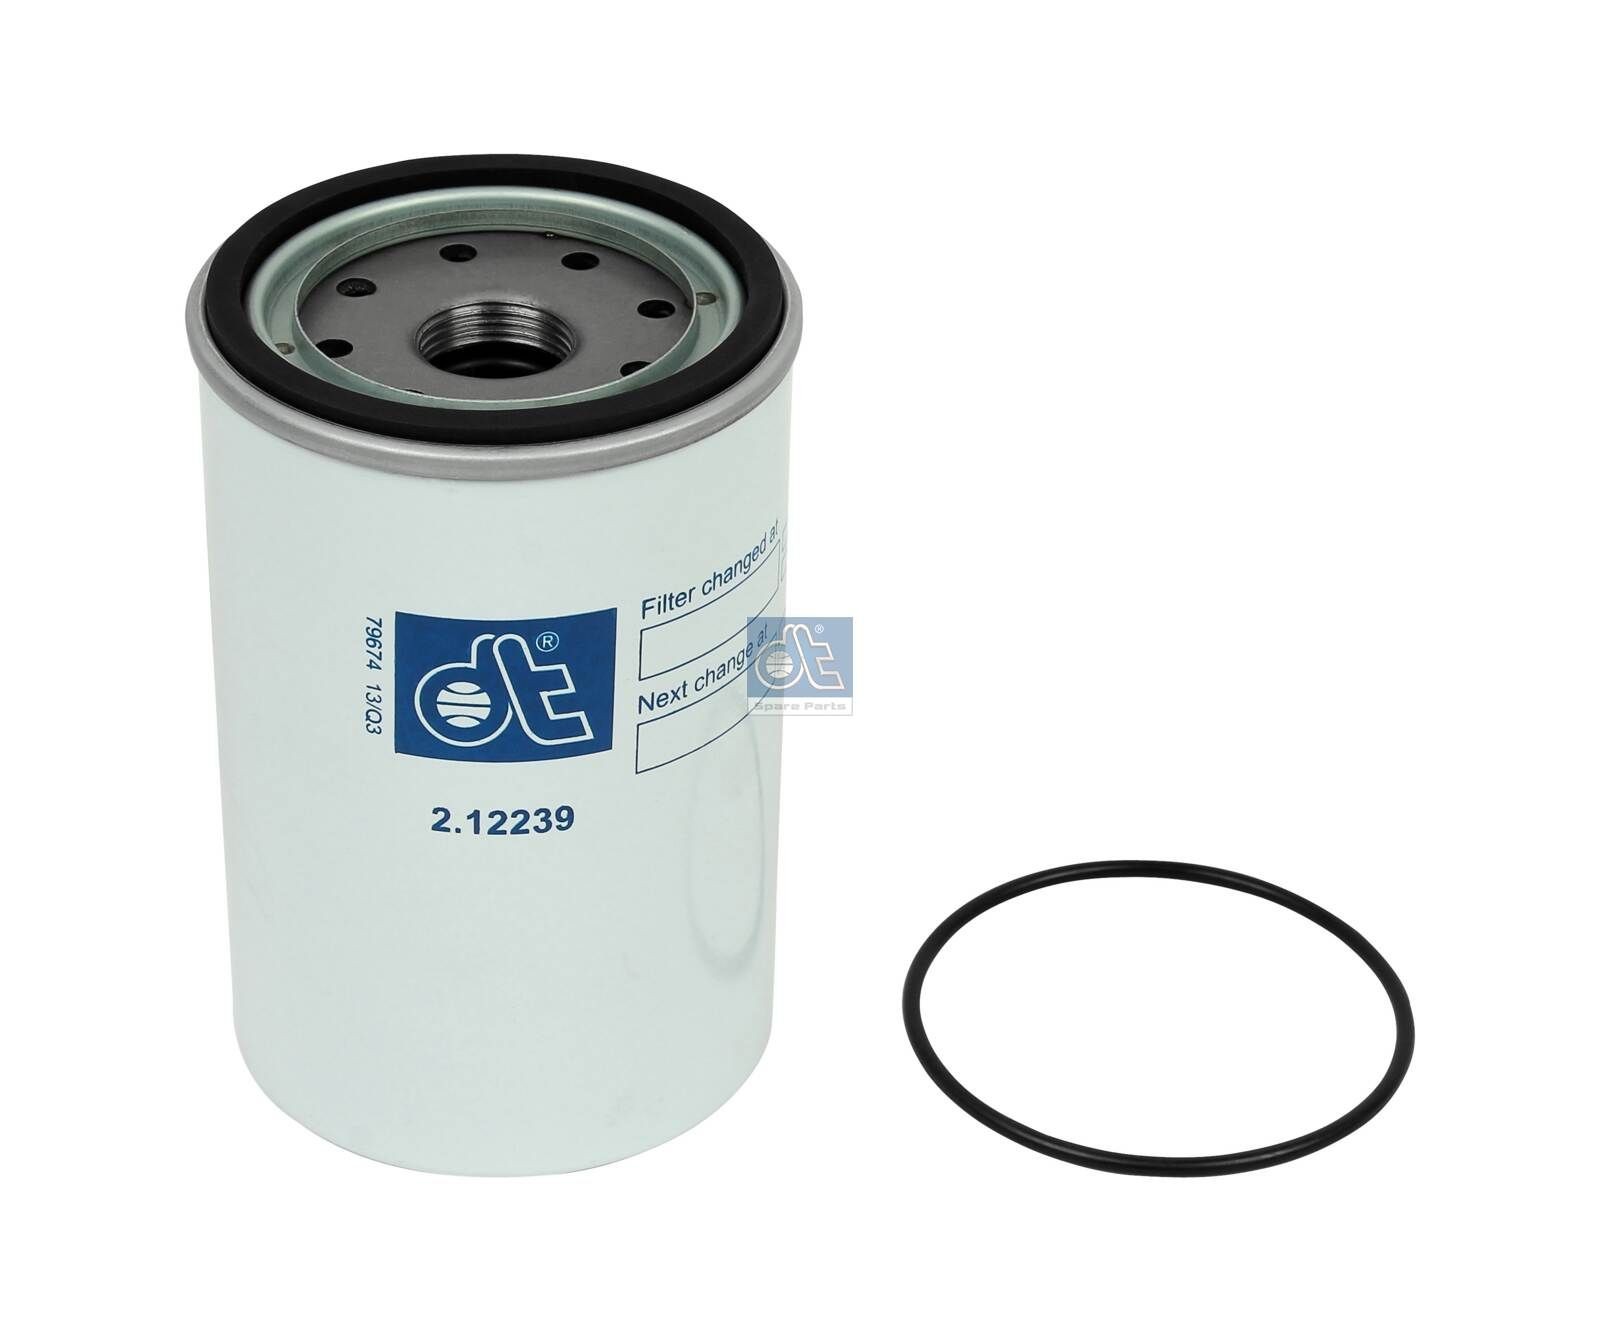 WK 940/33 x DT Spare Parts 2.12239 Fuel filter 2 0998 367